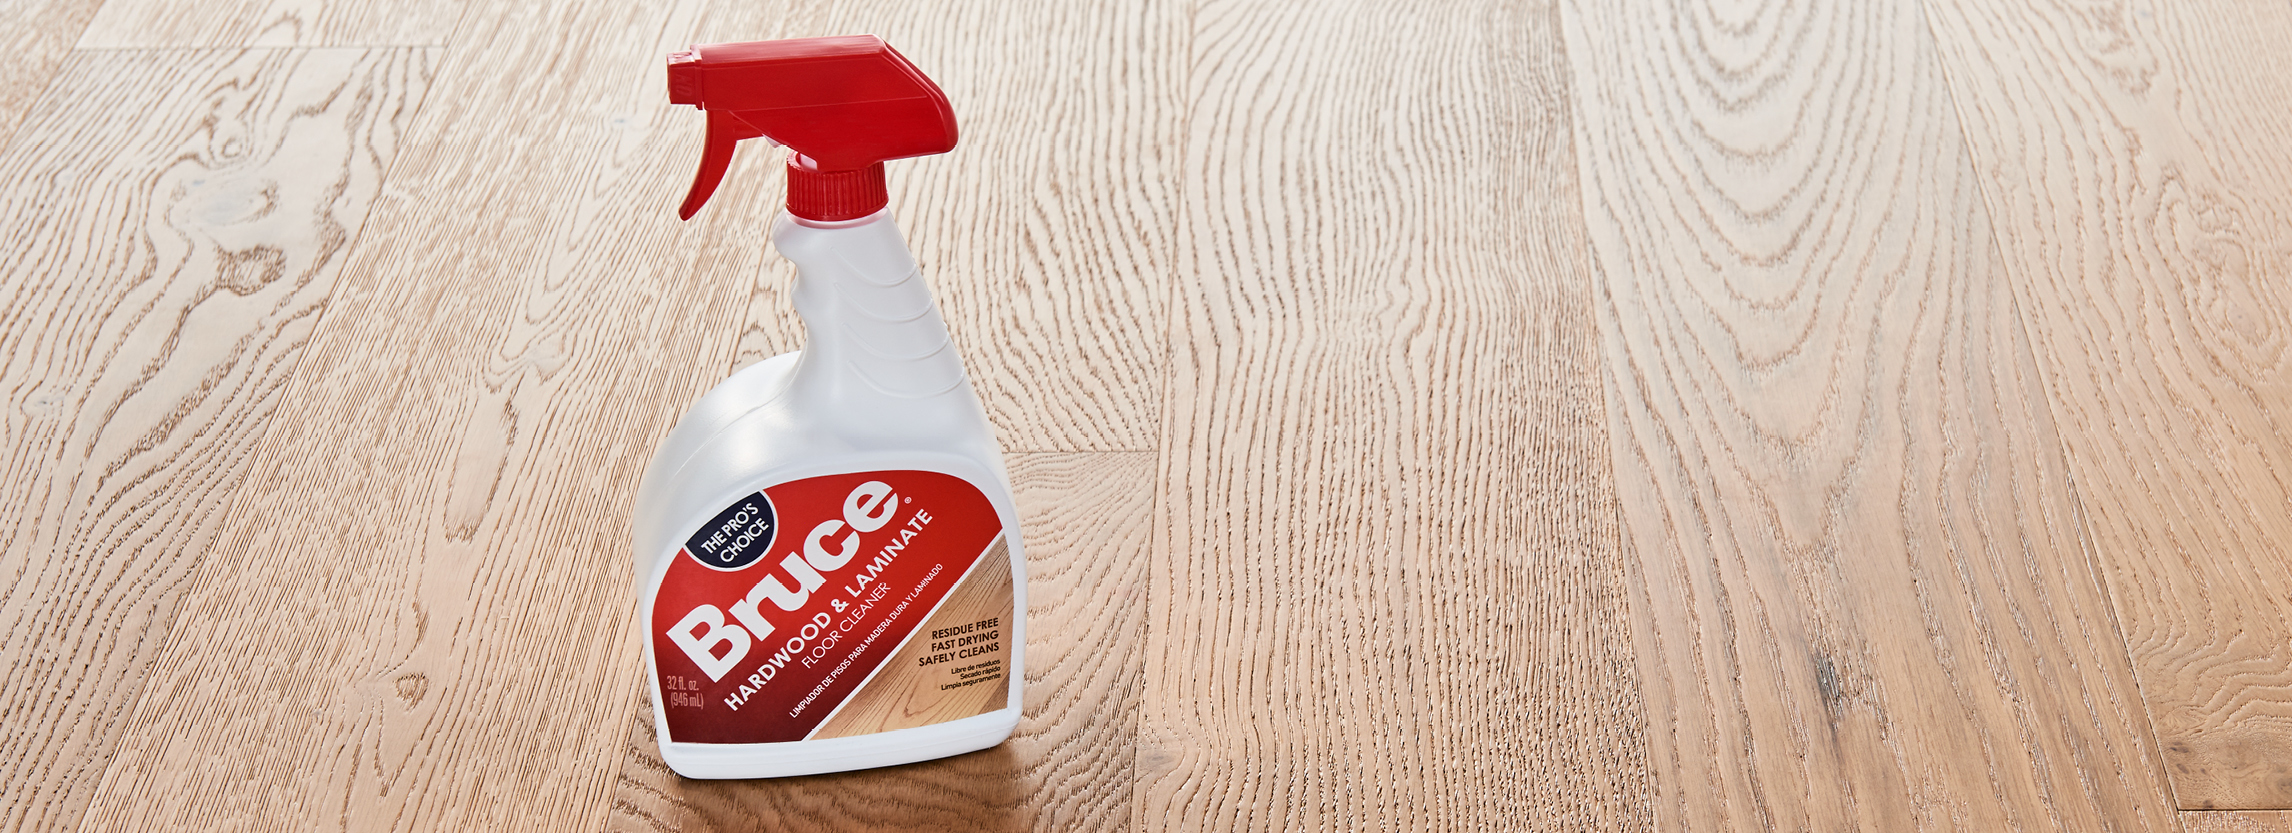 How To Care For Hardwood Floors, Bruce Hardwood And Laminate Floor Cleaner